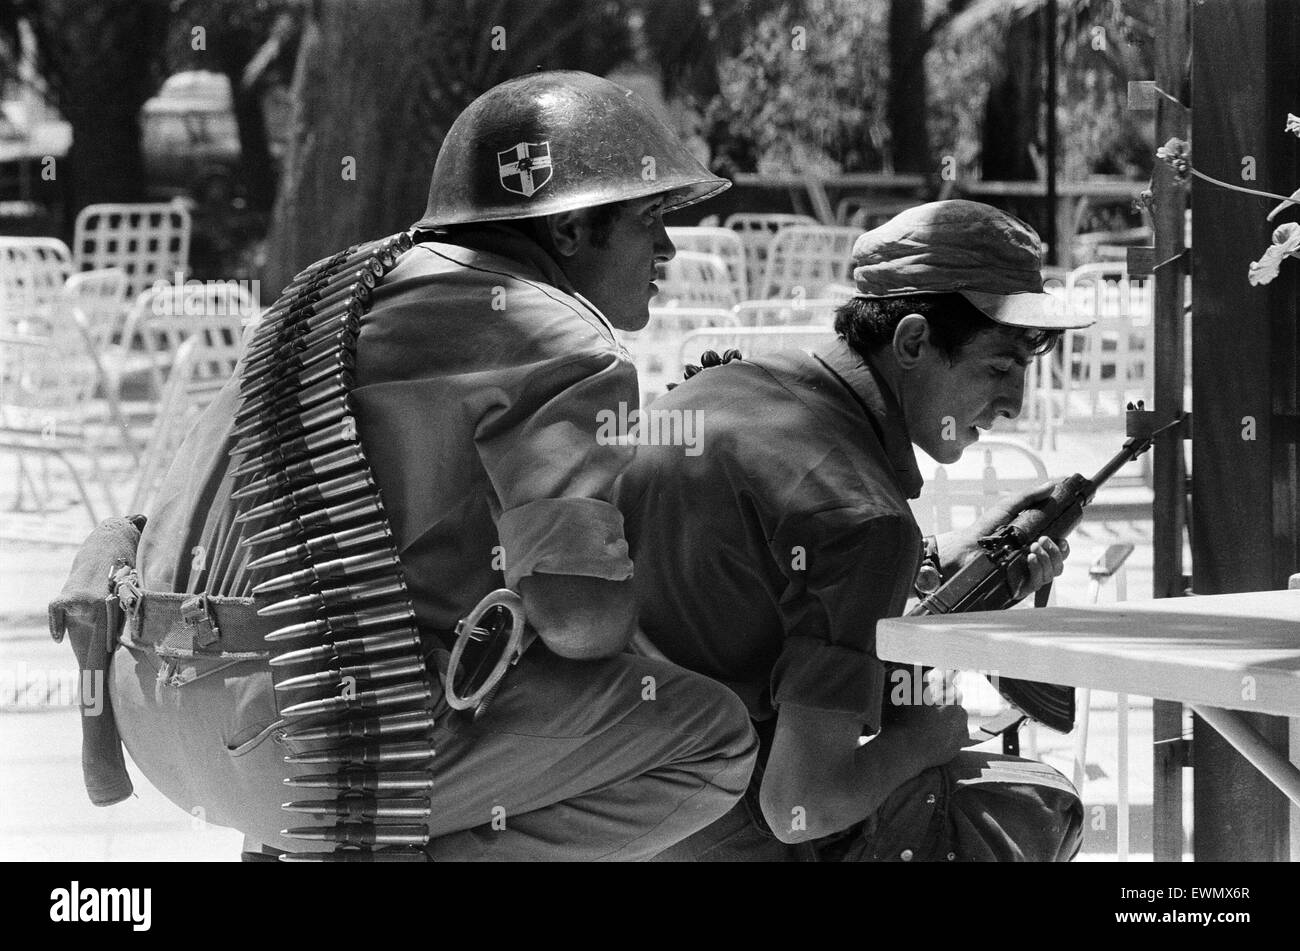 Greek Cypriot soldiers, during fighting amid the Turkish invasion of Cyprus. 22nd July 1974. Stock Photo